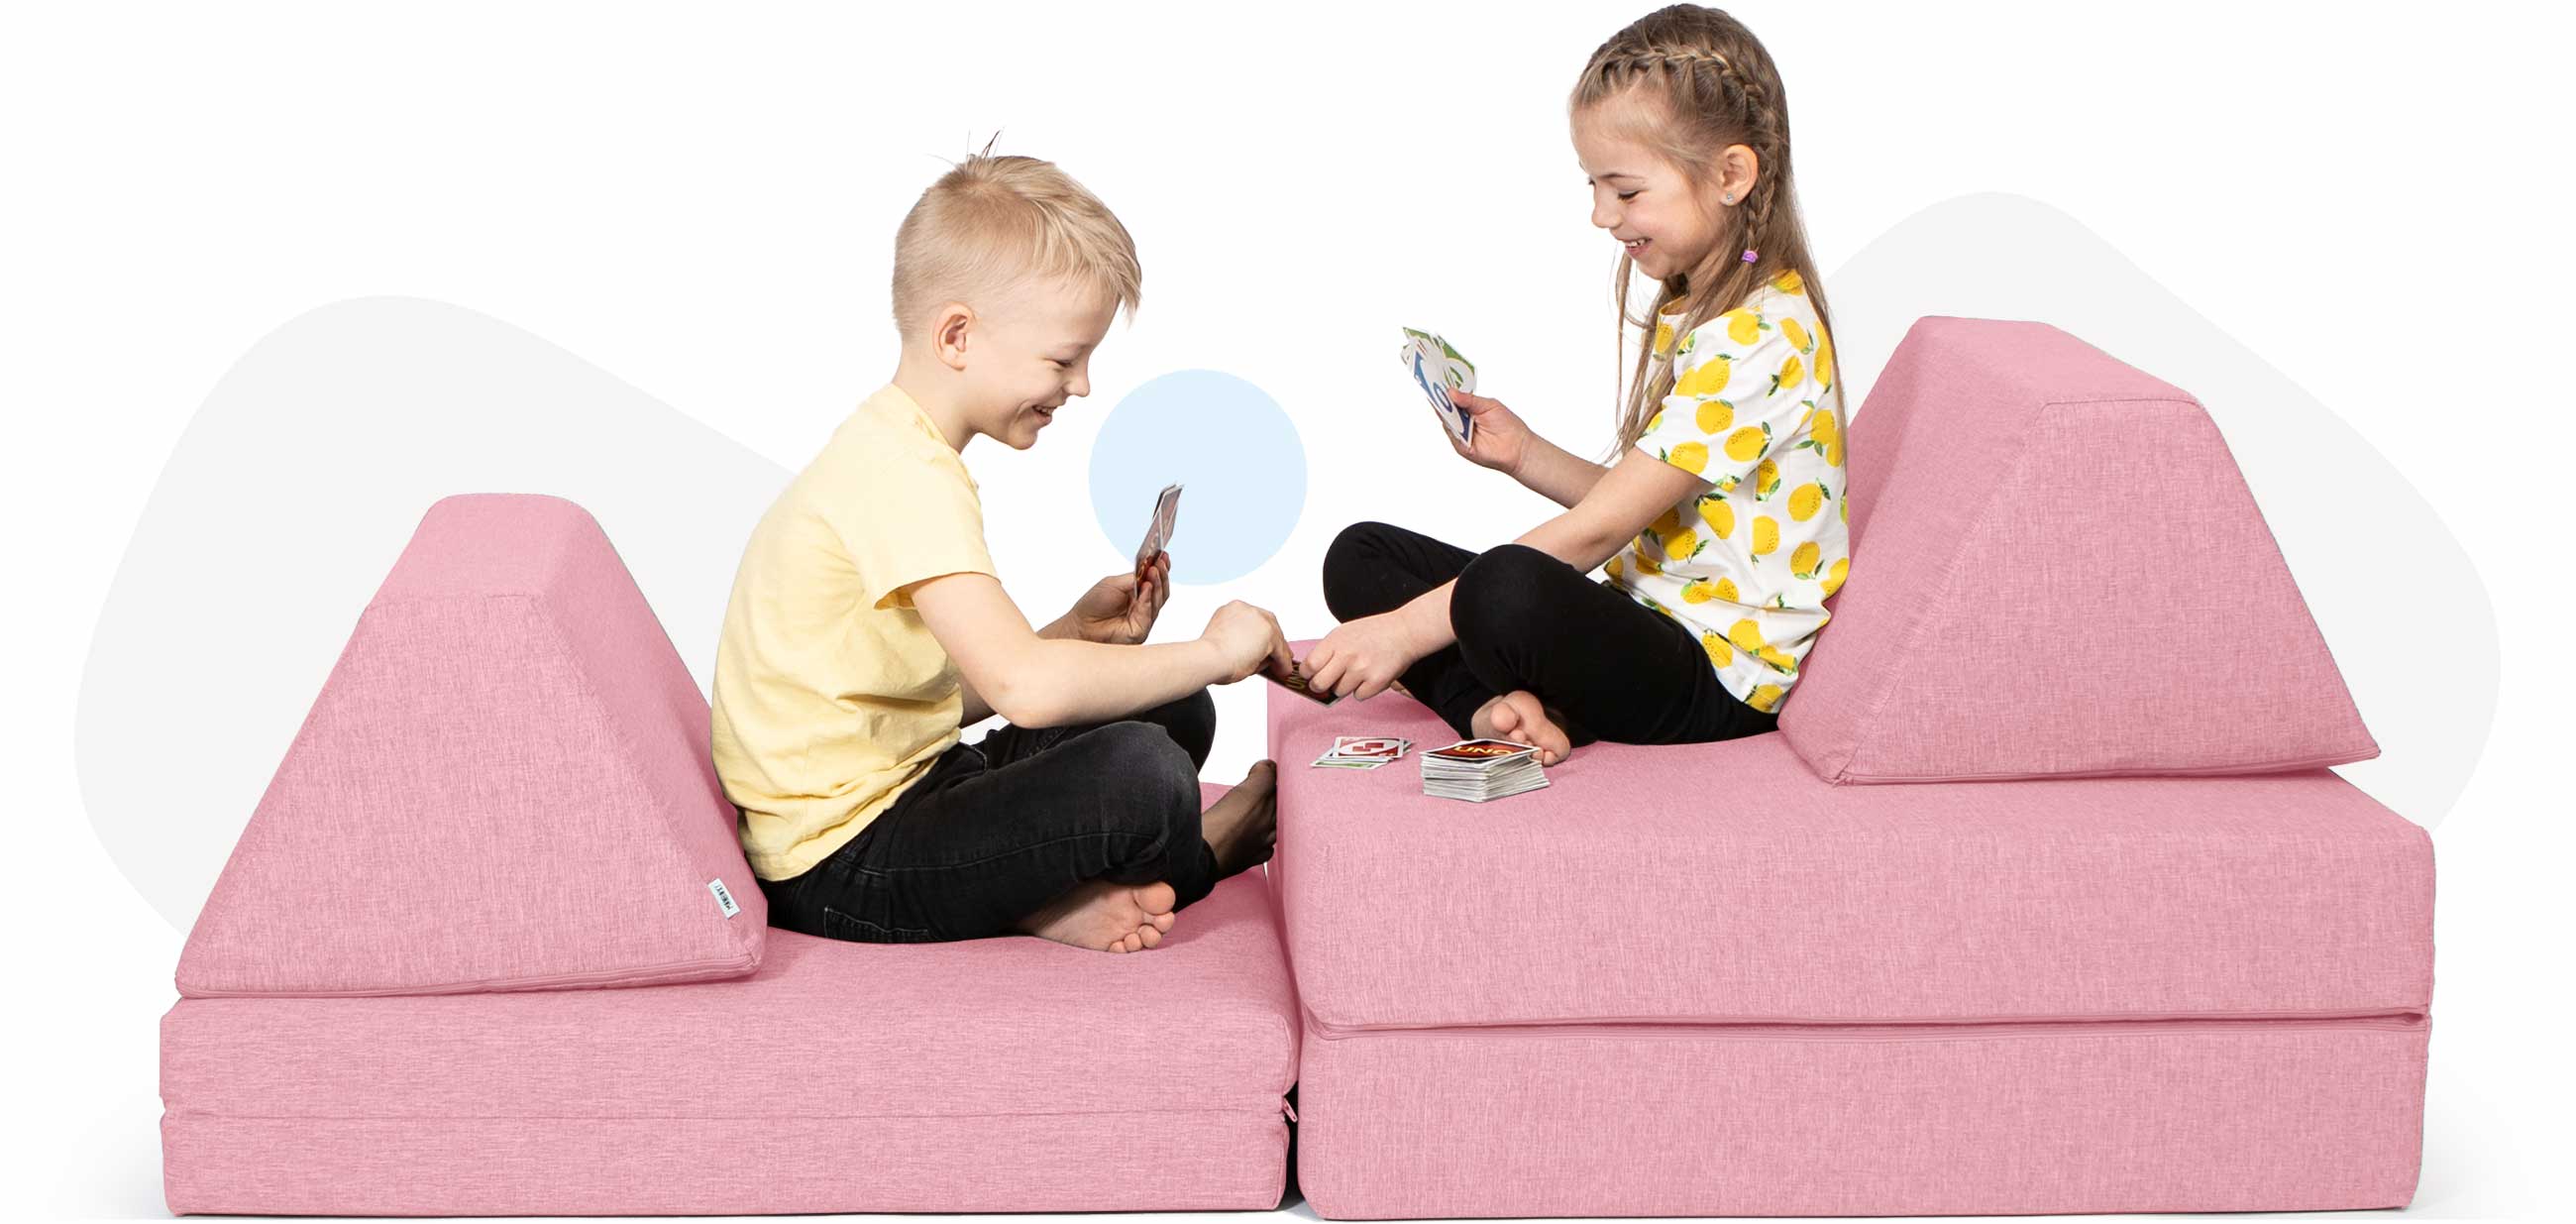 Kids sitting and playing cards on a pink Monboxy activity sofa